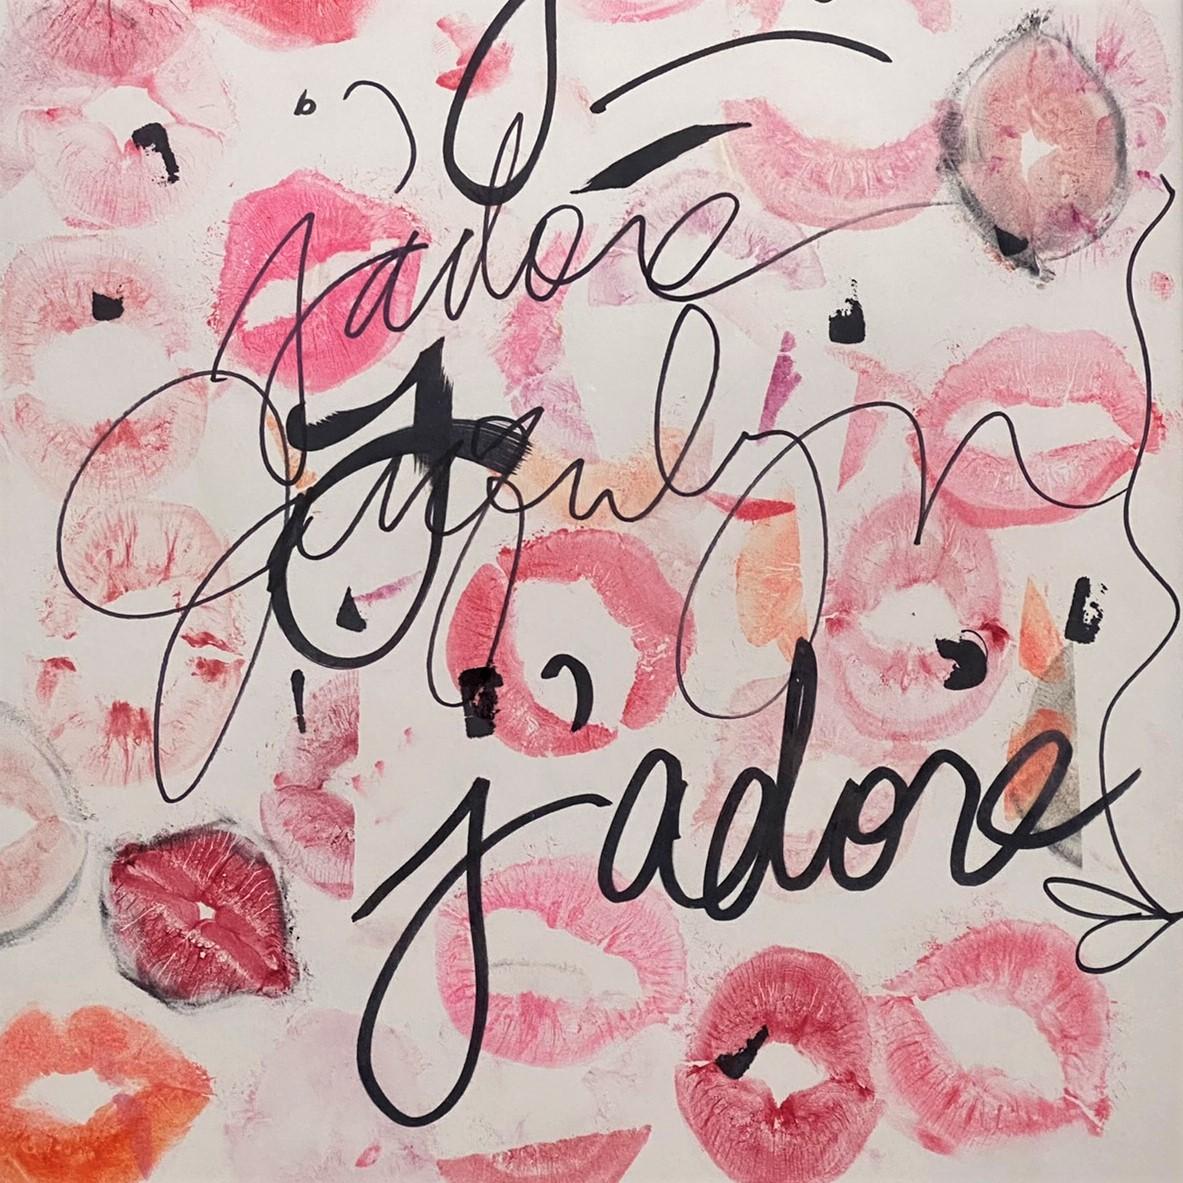 j'adore Jacquelyn - Painting by Leo Lopez